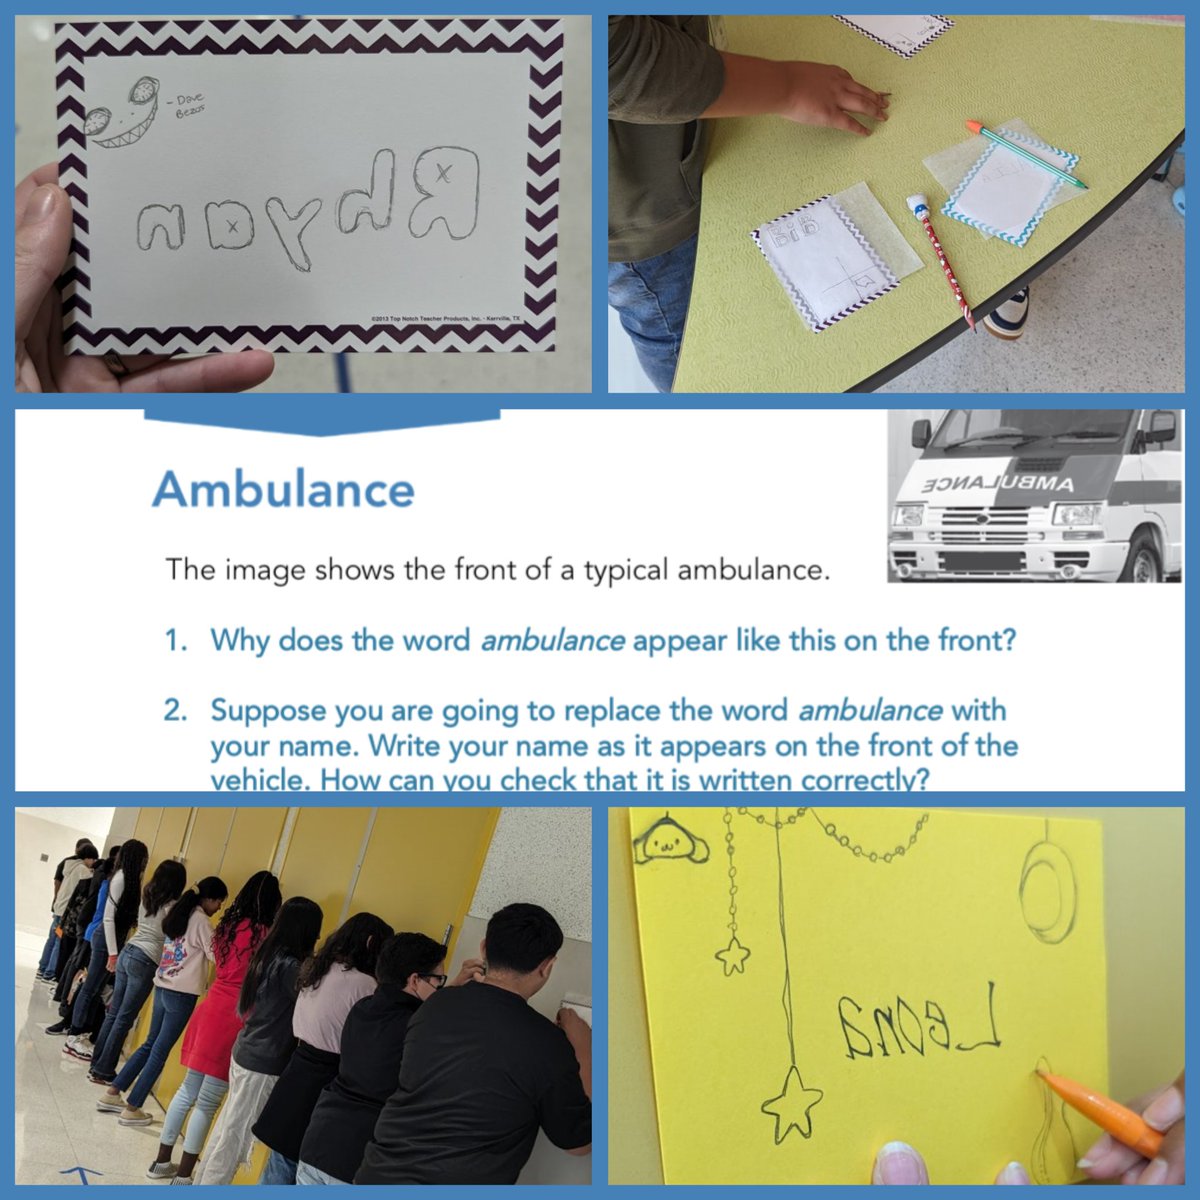 Watch as students own their learning, crafting unique reflections of their identities onto index cards—an artistic twist to mathematical exploration!
#AldineArt @AldineArt #Team2Legit2Quit #MyAldine
@ChiquitaSanders @JonesMS_AISD @TRod_Math13 @Shawronah27